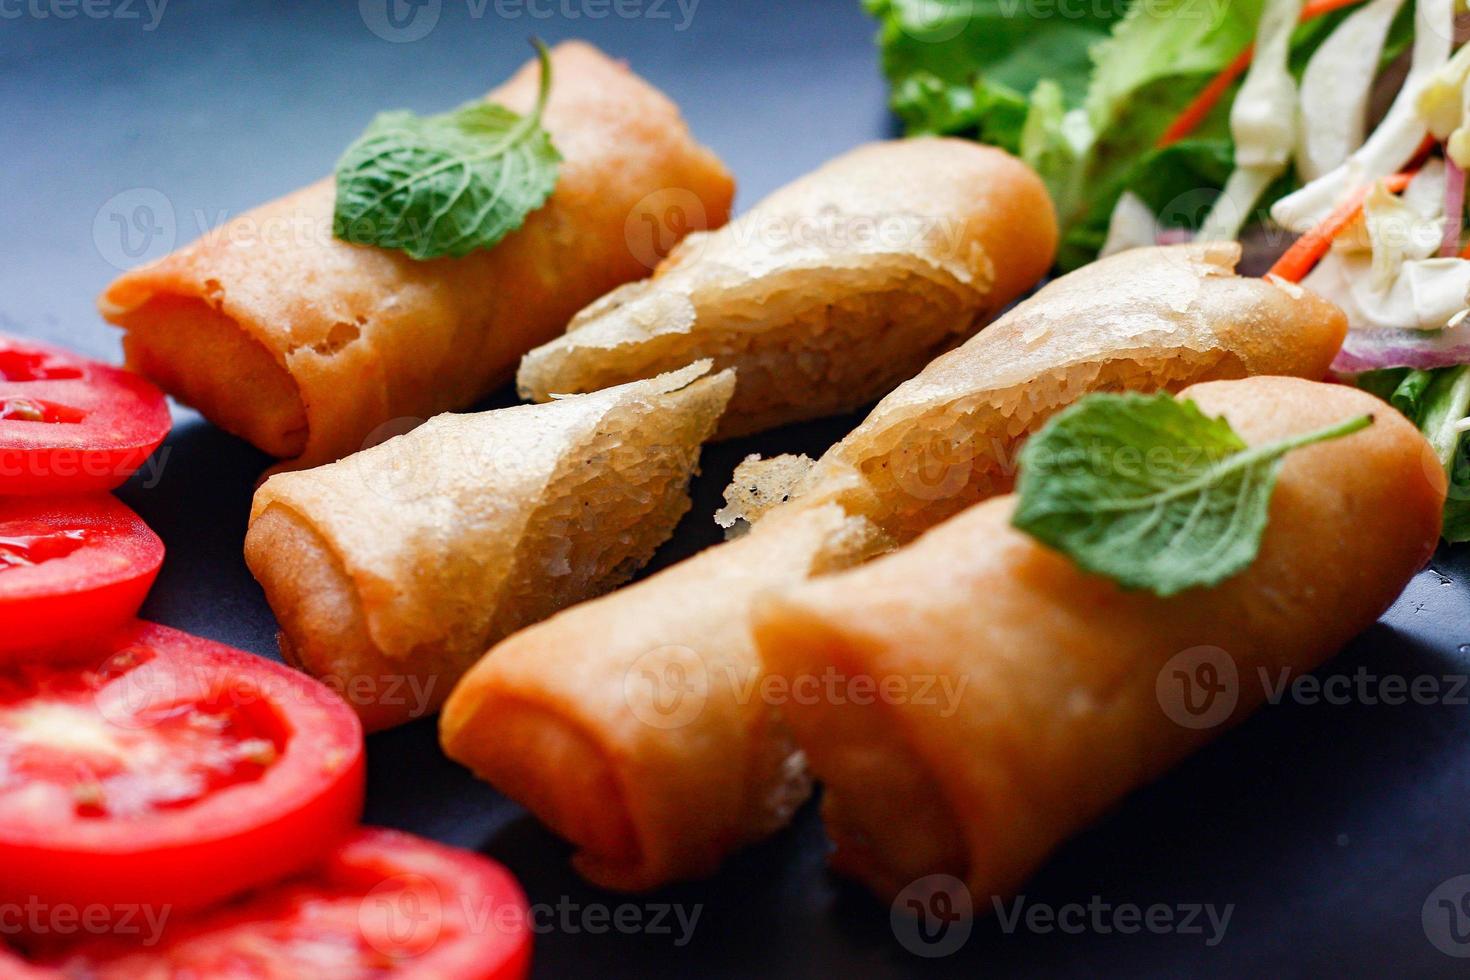 Fried spring rolls with vegetables and tomatoes placed in a black plate on a black wooden table and dipping sauce. photo